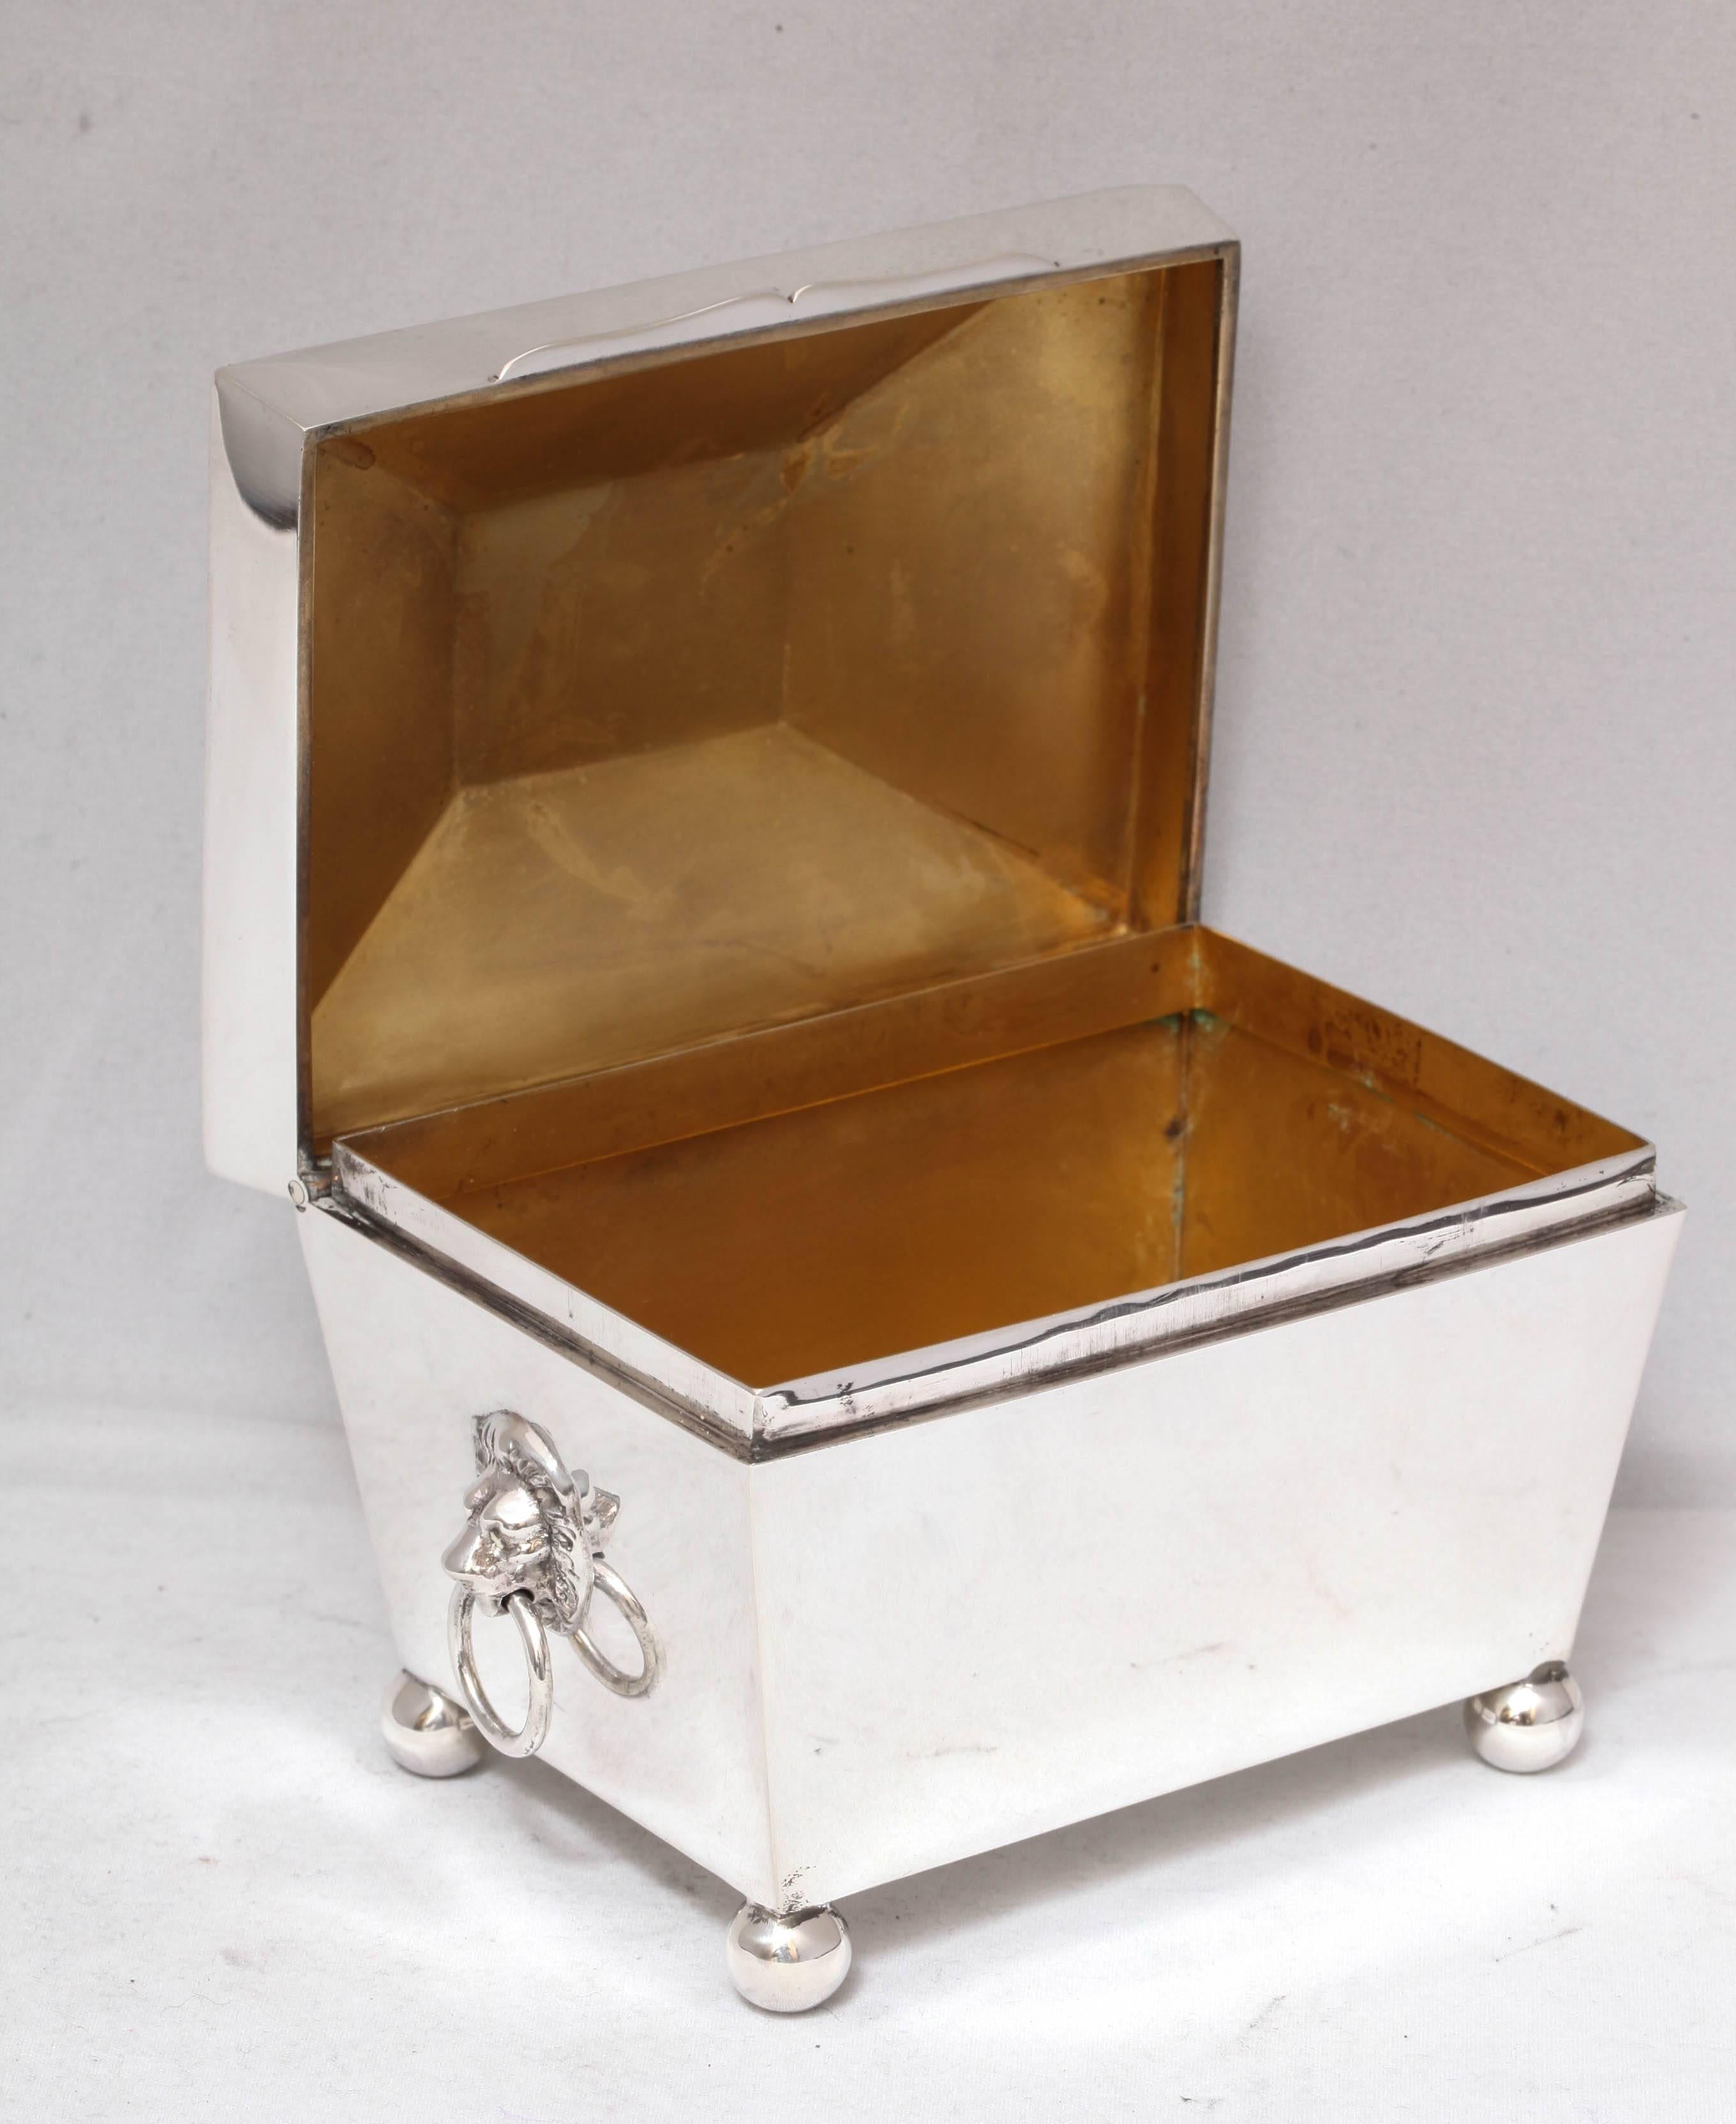 Edwardian, rare and unusual sterling silver table box with hinged lid, ball feet and 